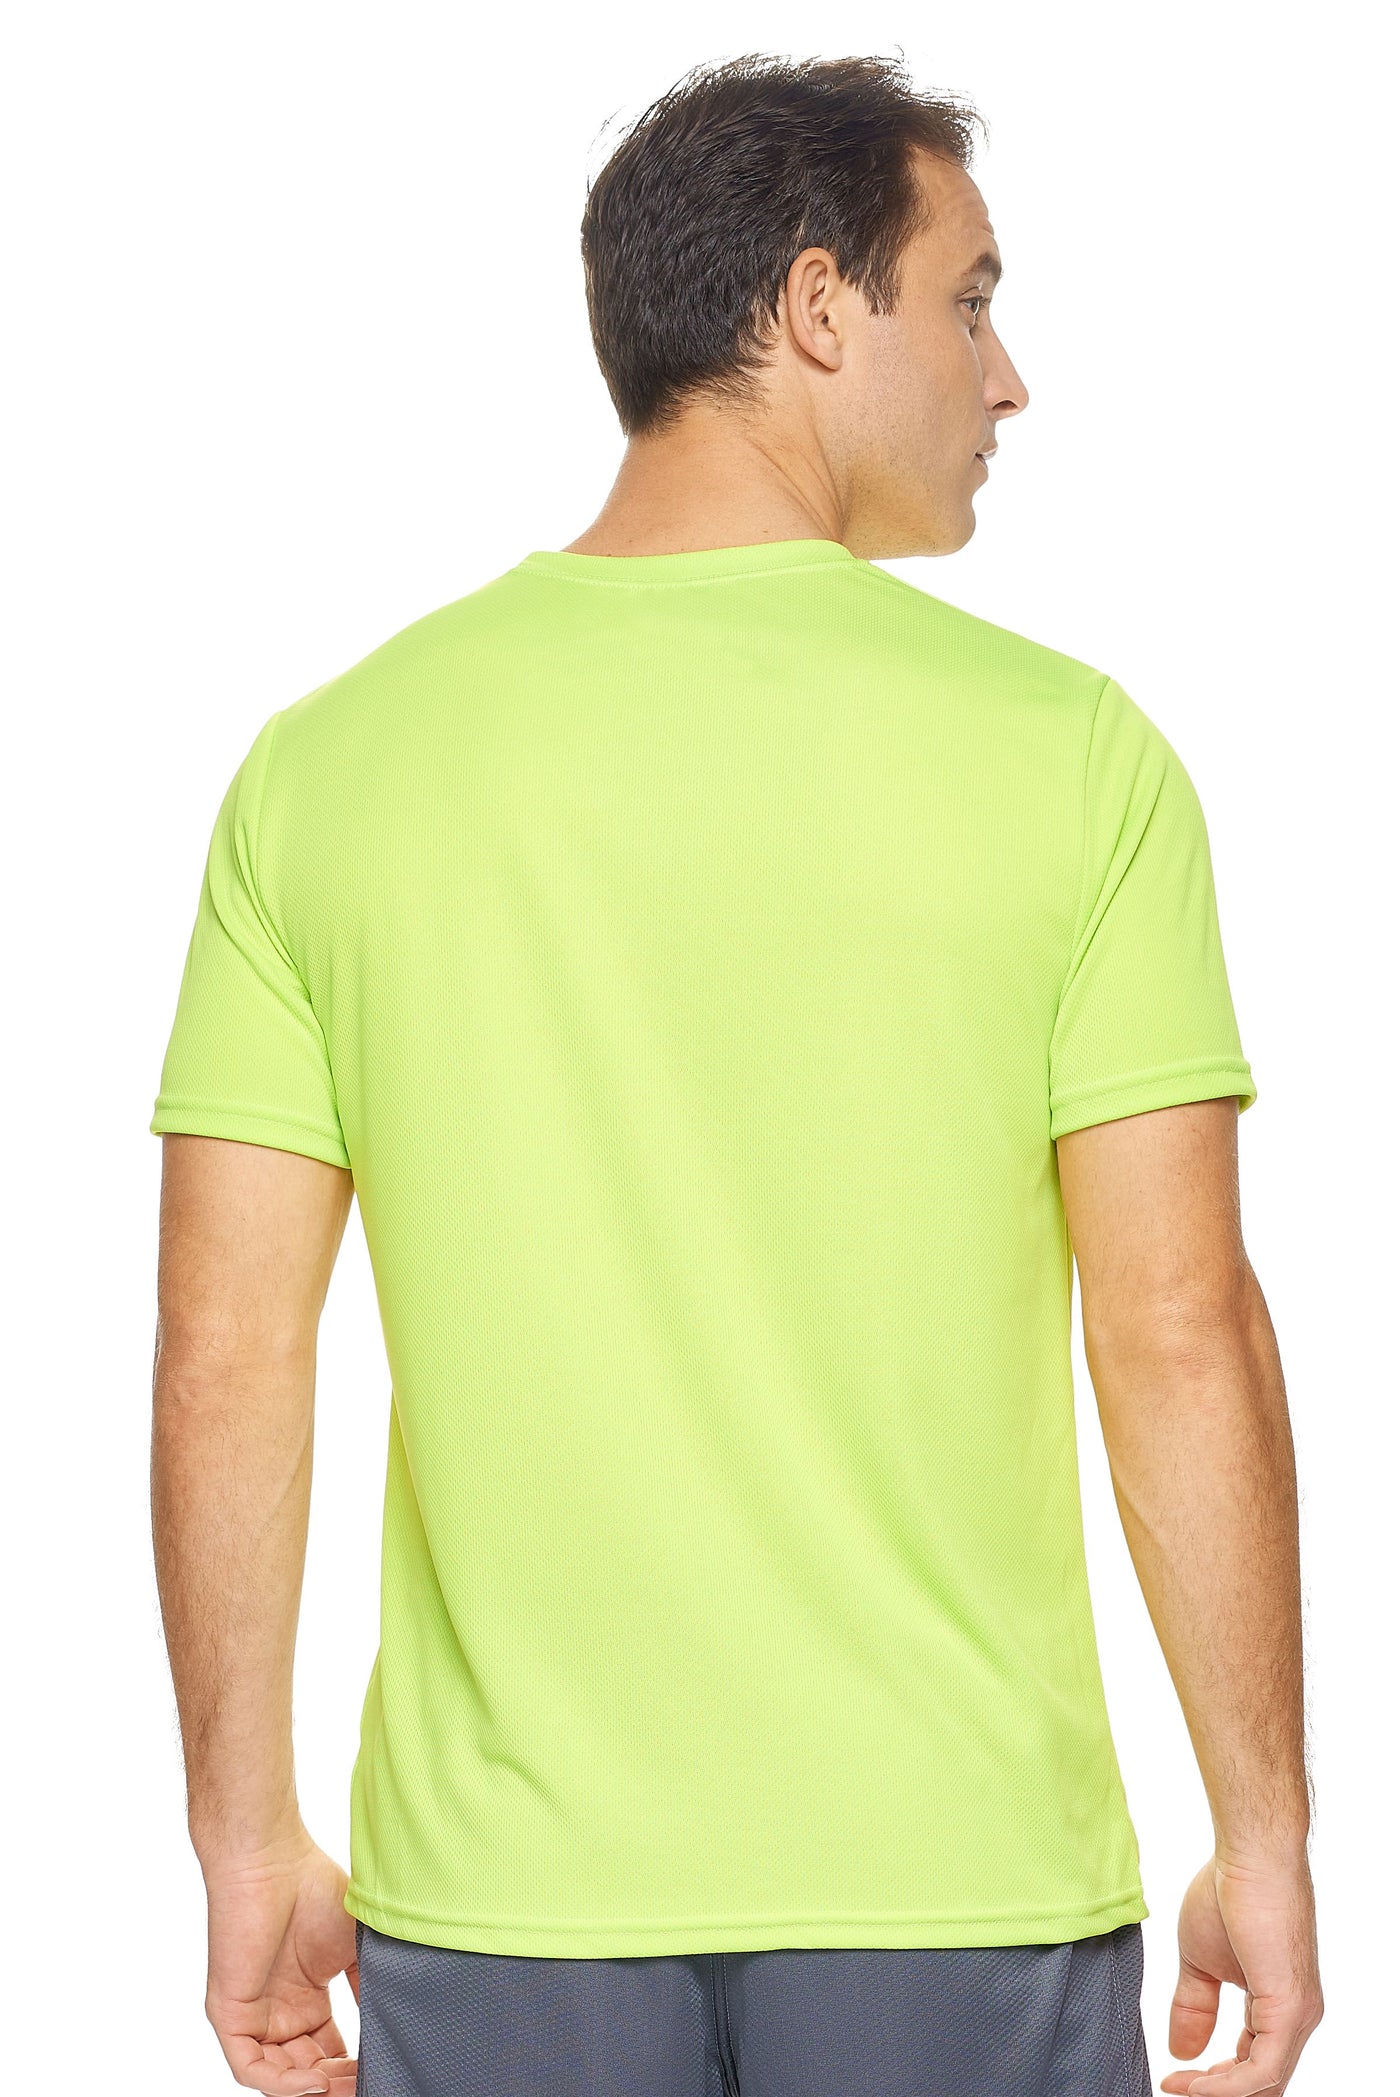 Expert Brand Retail Sportswear Men's Oxymesh Tec Tee Made in USA activewear Key Lime 3#color_key-lime